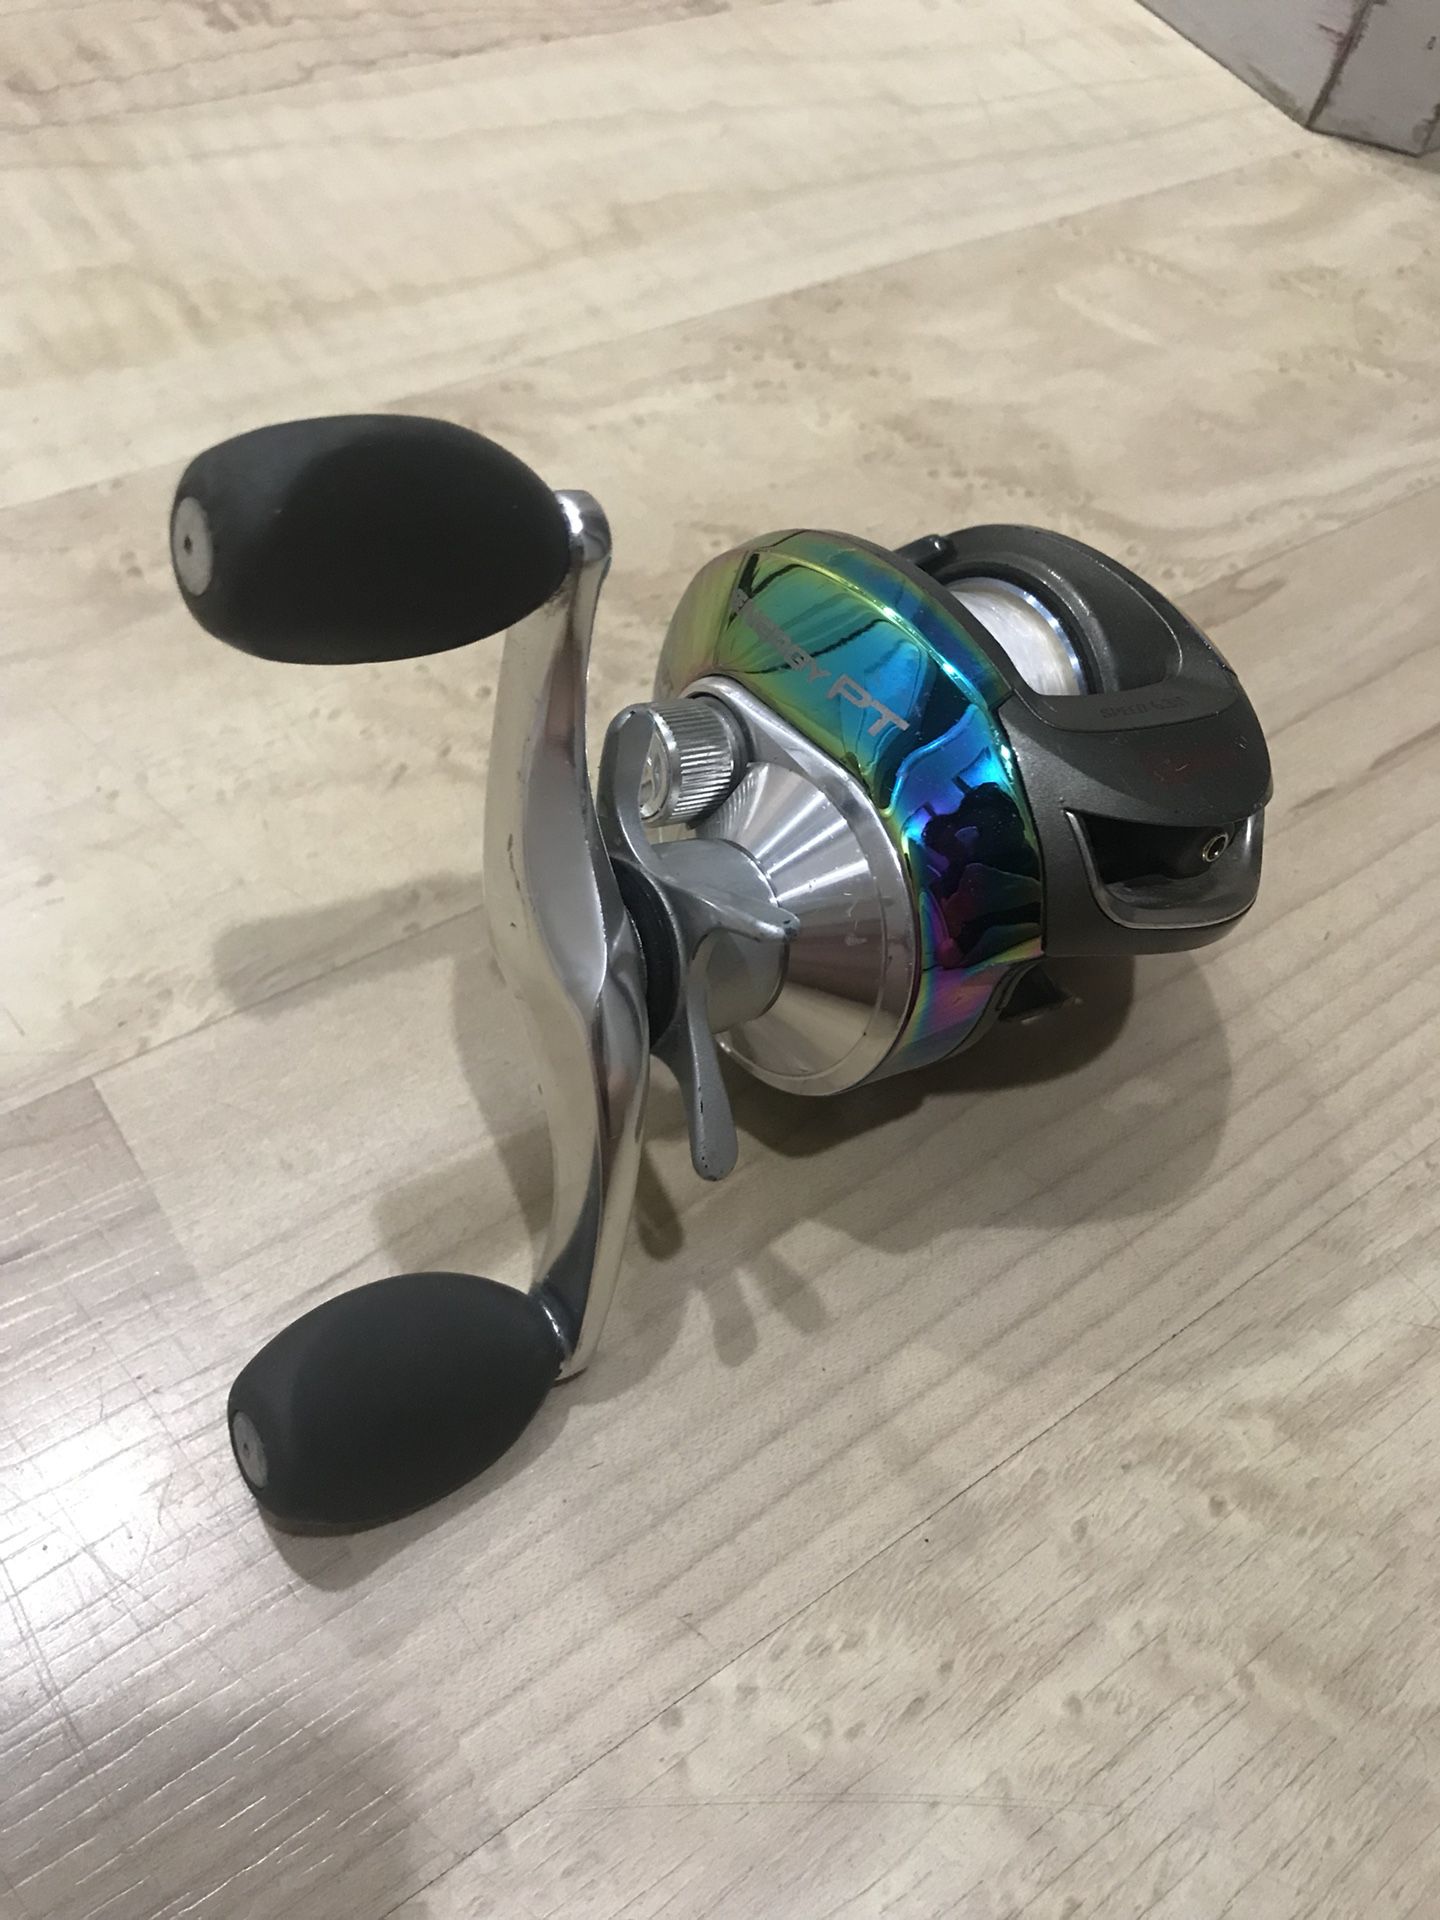 Fishing reel for Sale in San Diego, CA - OfferUp